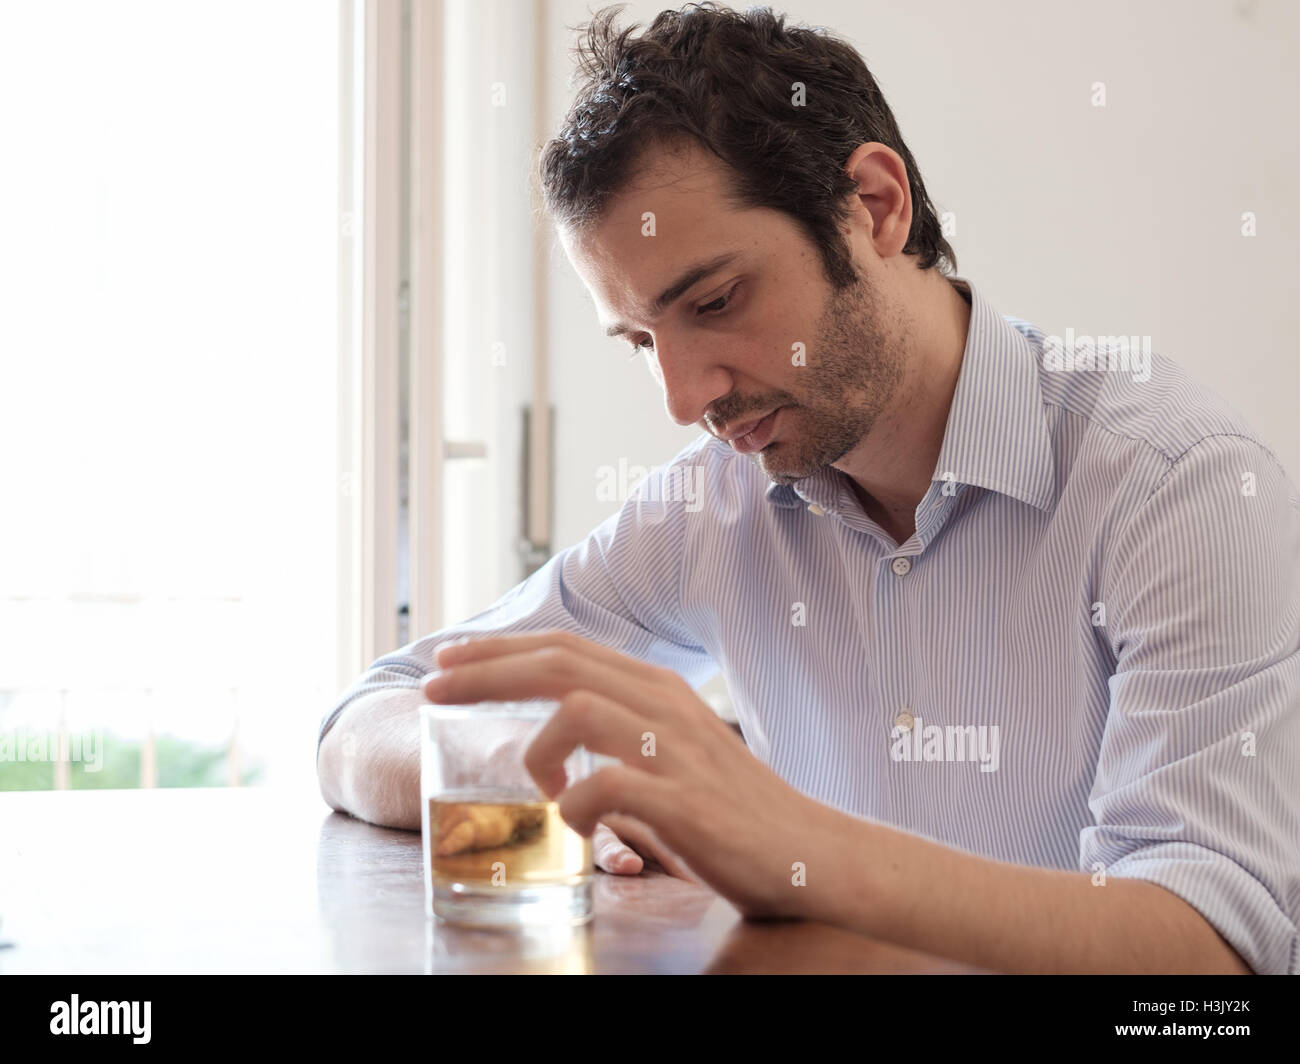 Depressed man abusing of alcohol trying to forget his problems Stock Photo